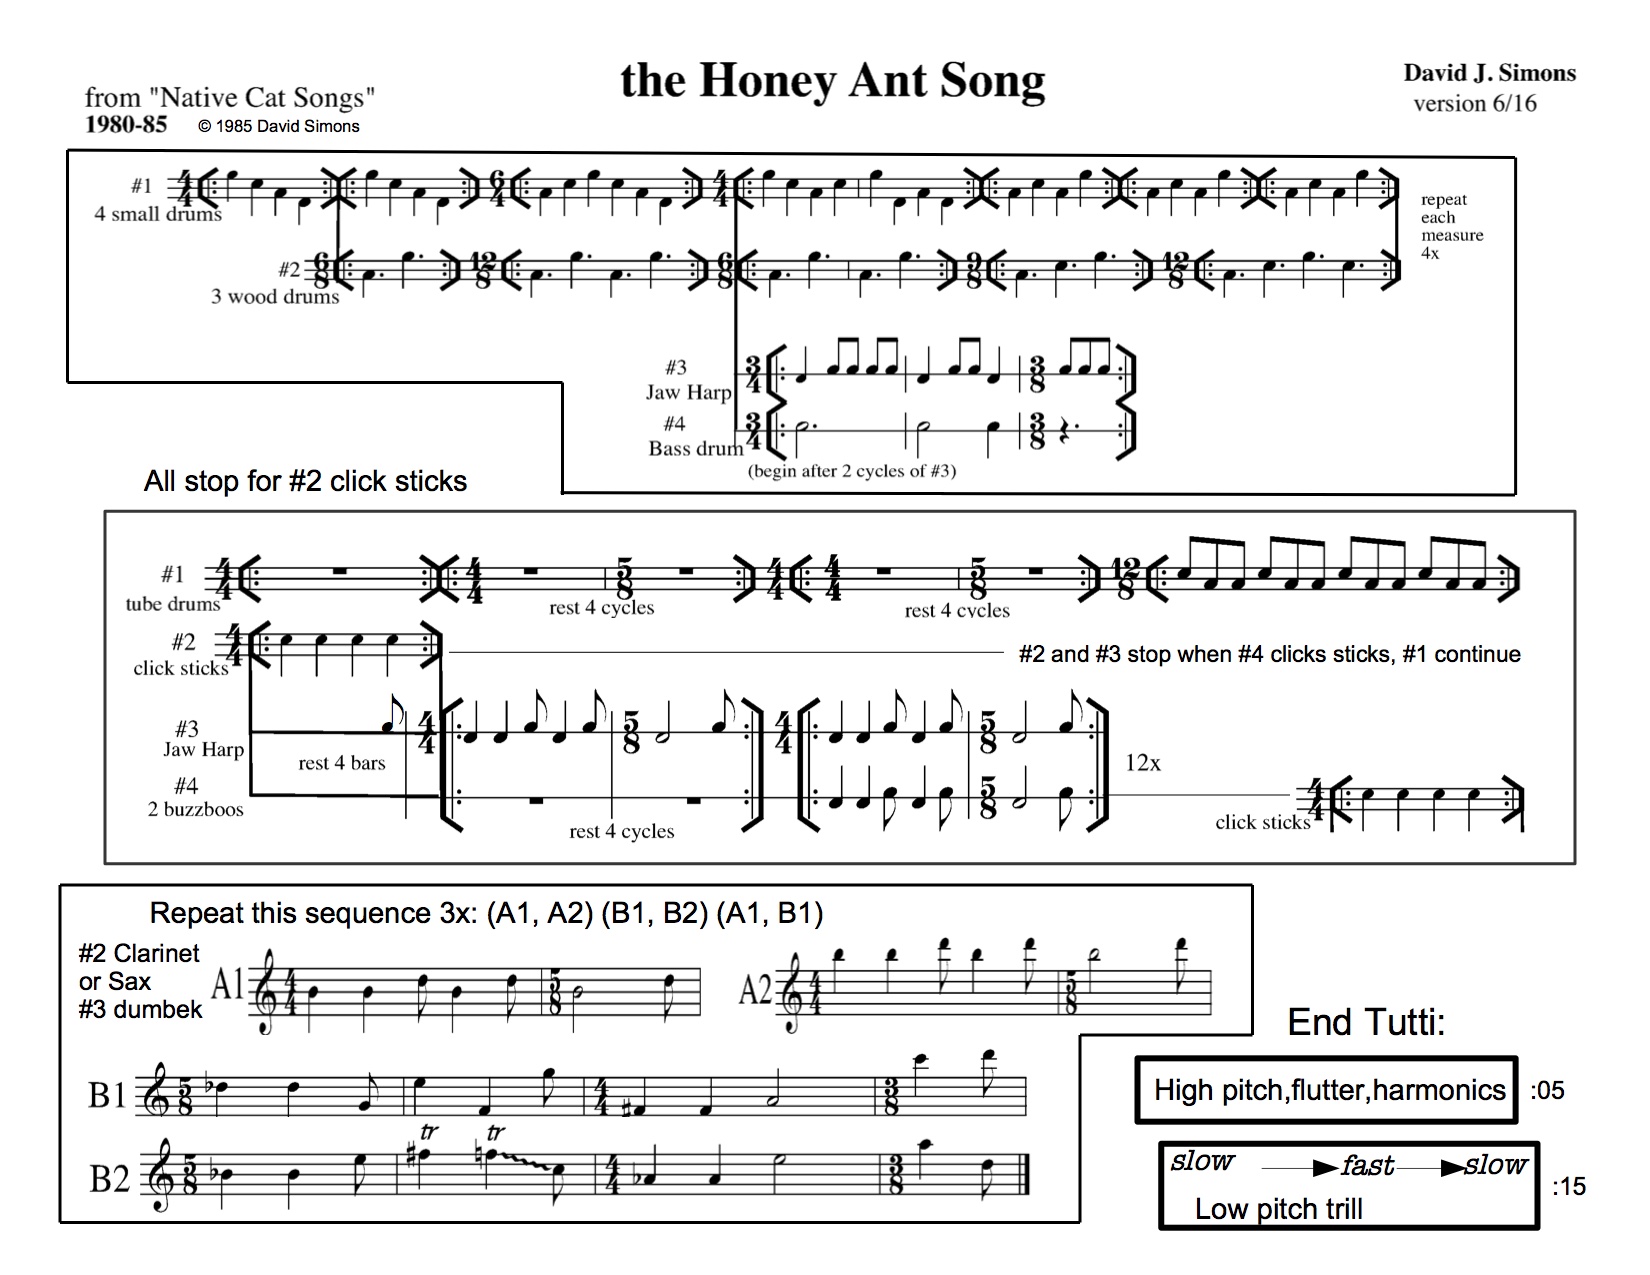 The Honey Ant Song